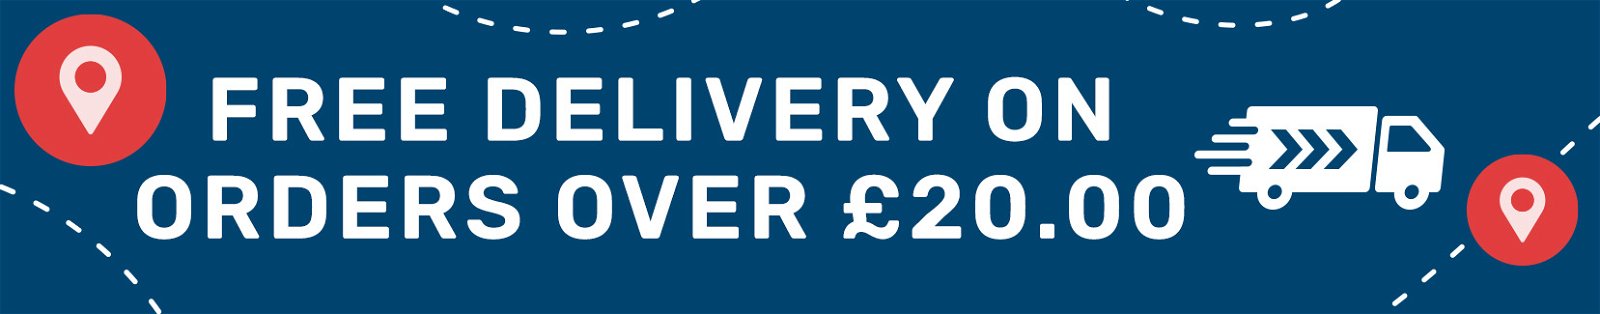 free delivery on orders over 20